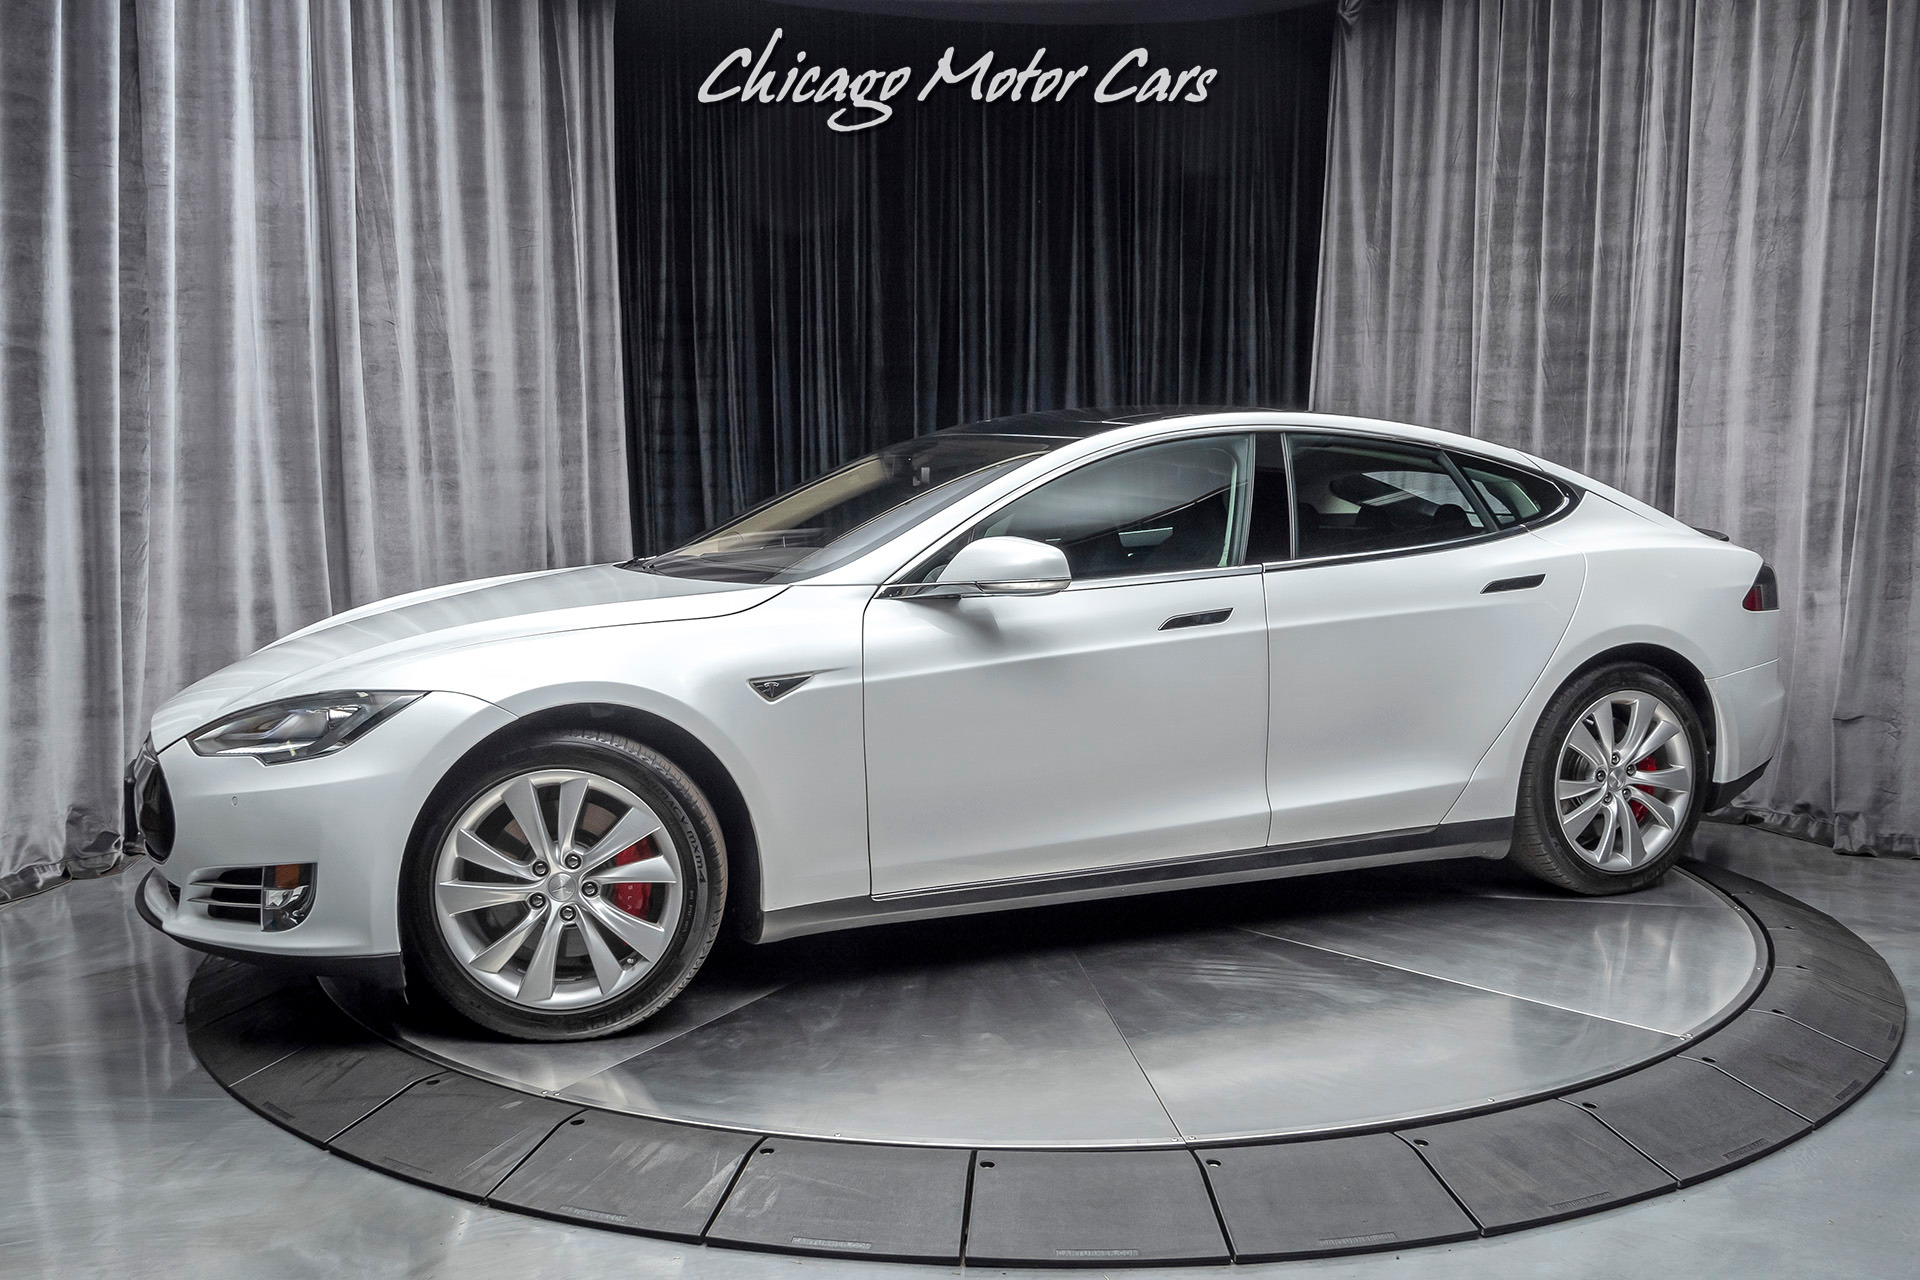 Used 2014 Tesla Model S P85 $115k+MSRP! Tech Package! High Fidelity Sound  Pkg! For Sale (Special Pricing) | Chicago Motor Cars Stock #17217